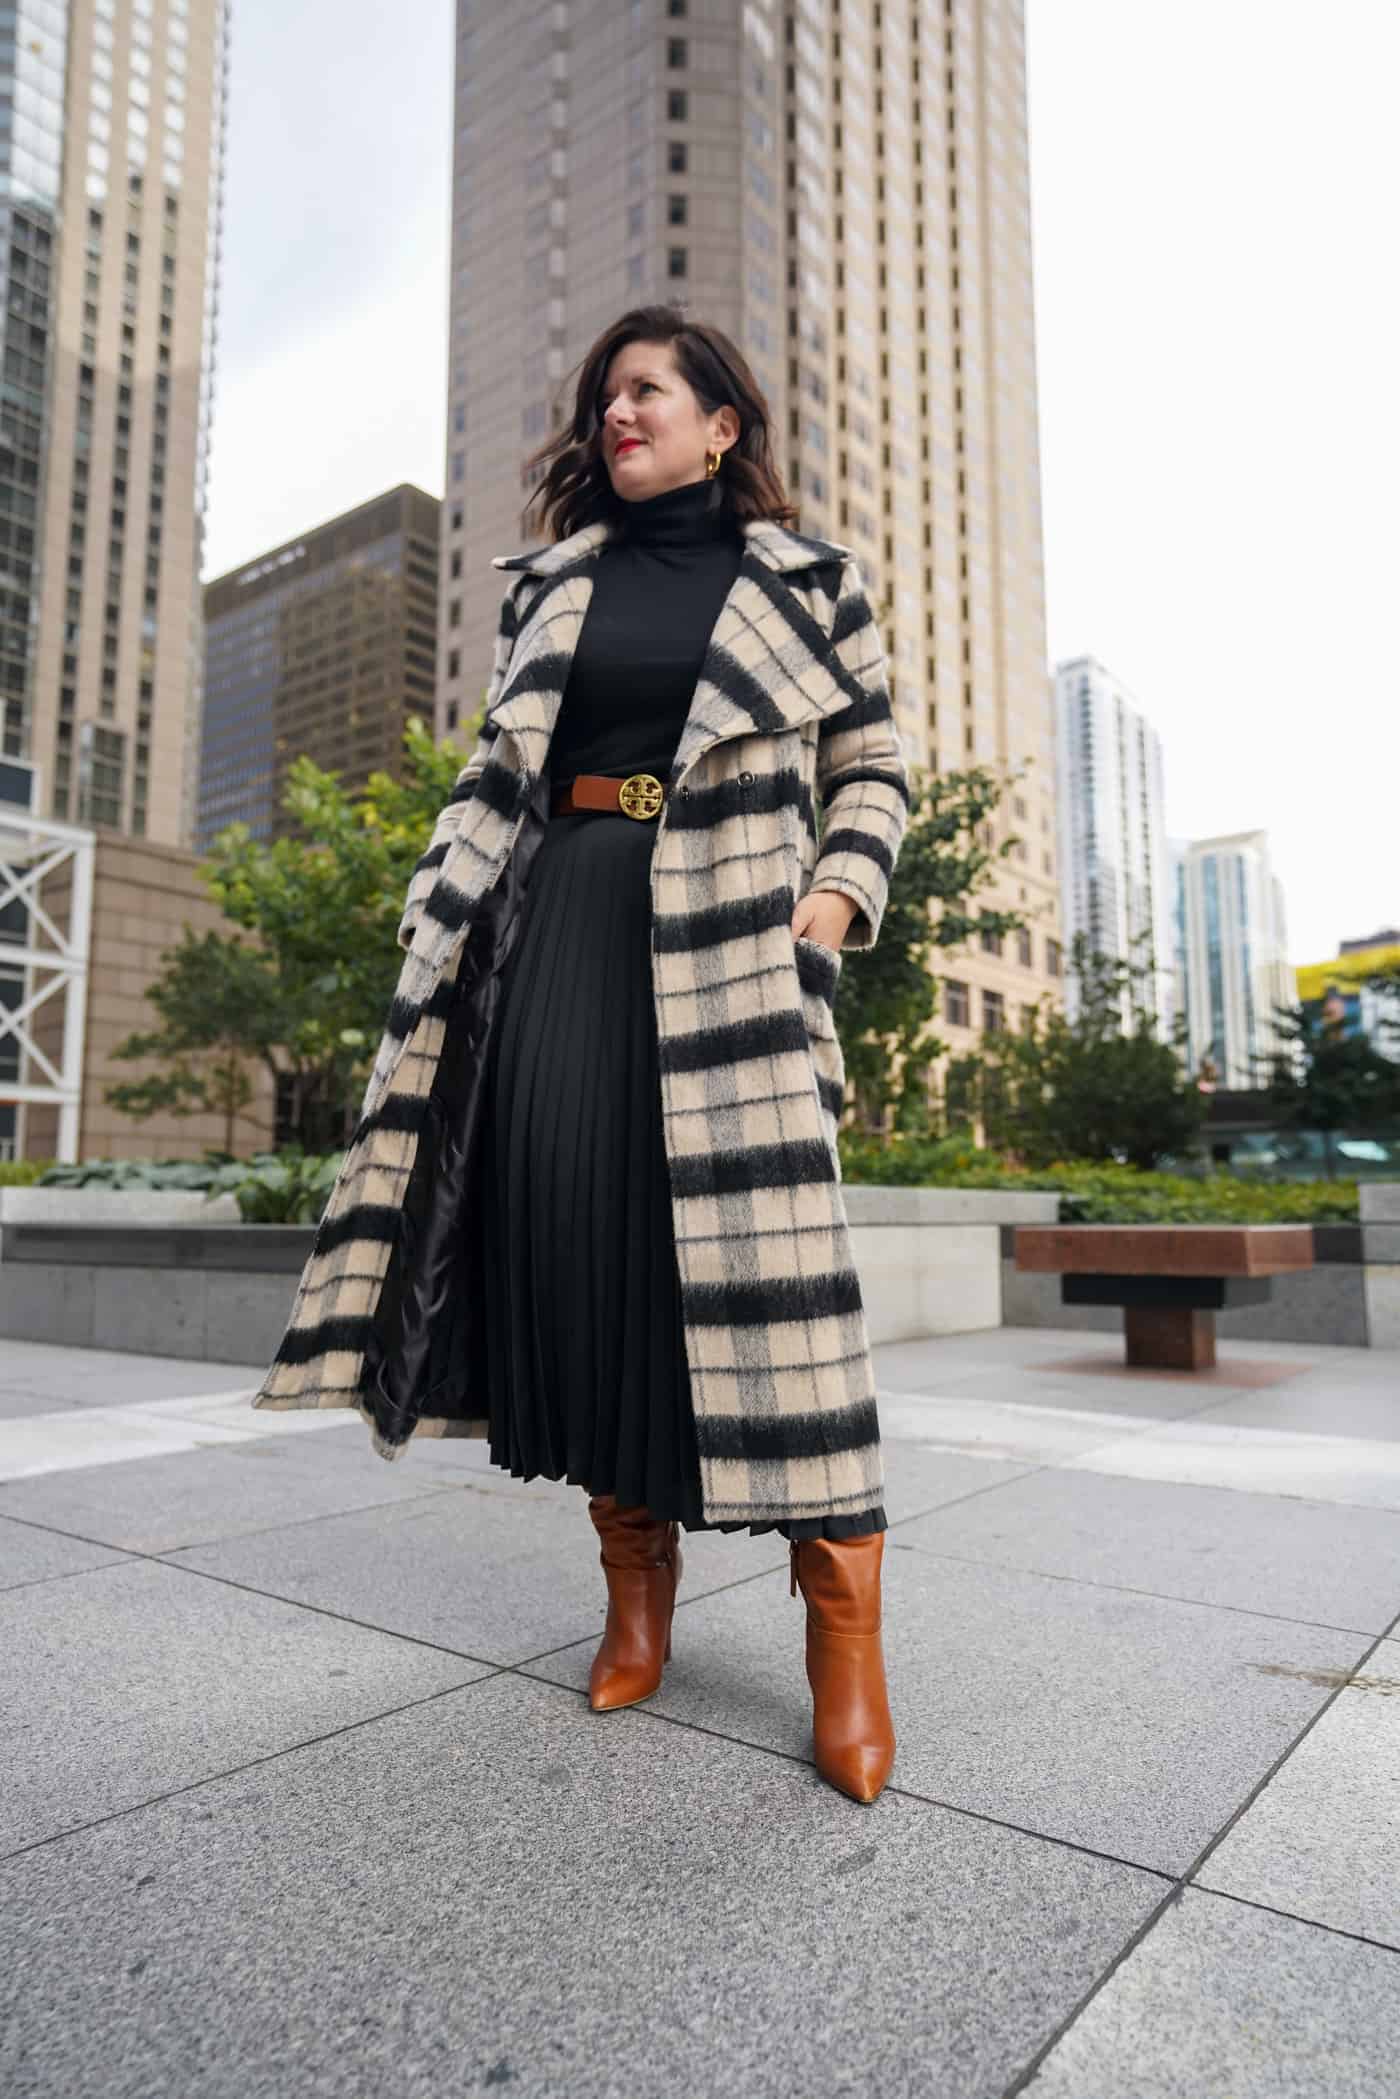 A Lily Love Affair shares how to wear a pleated skirt with black sweater, long plaid coat and brown boots